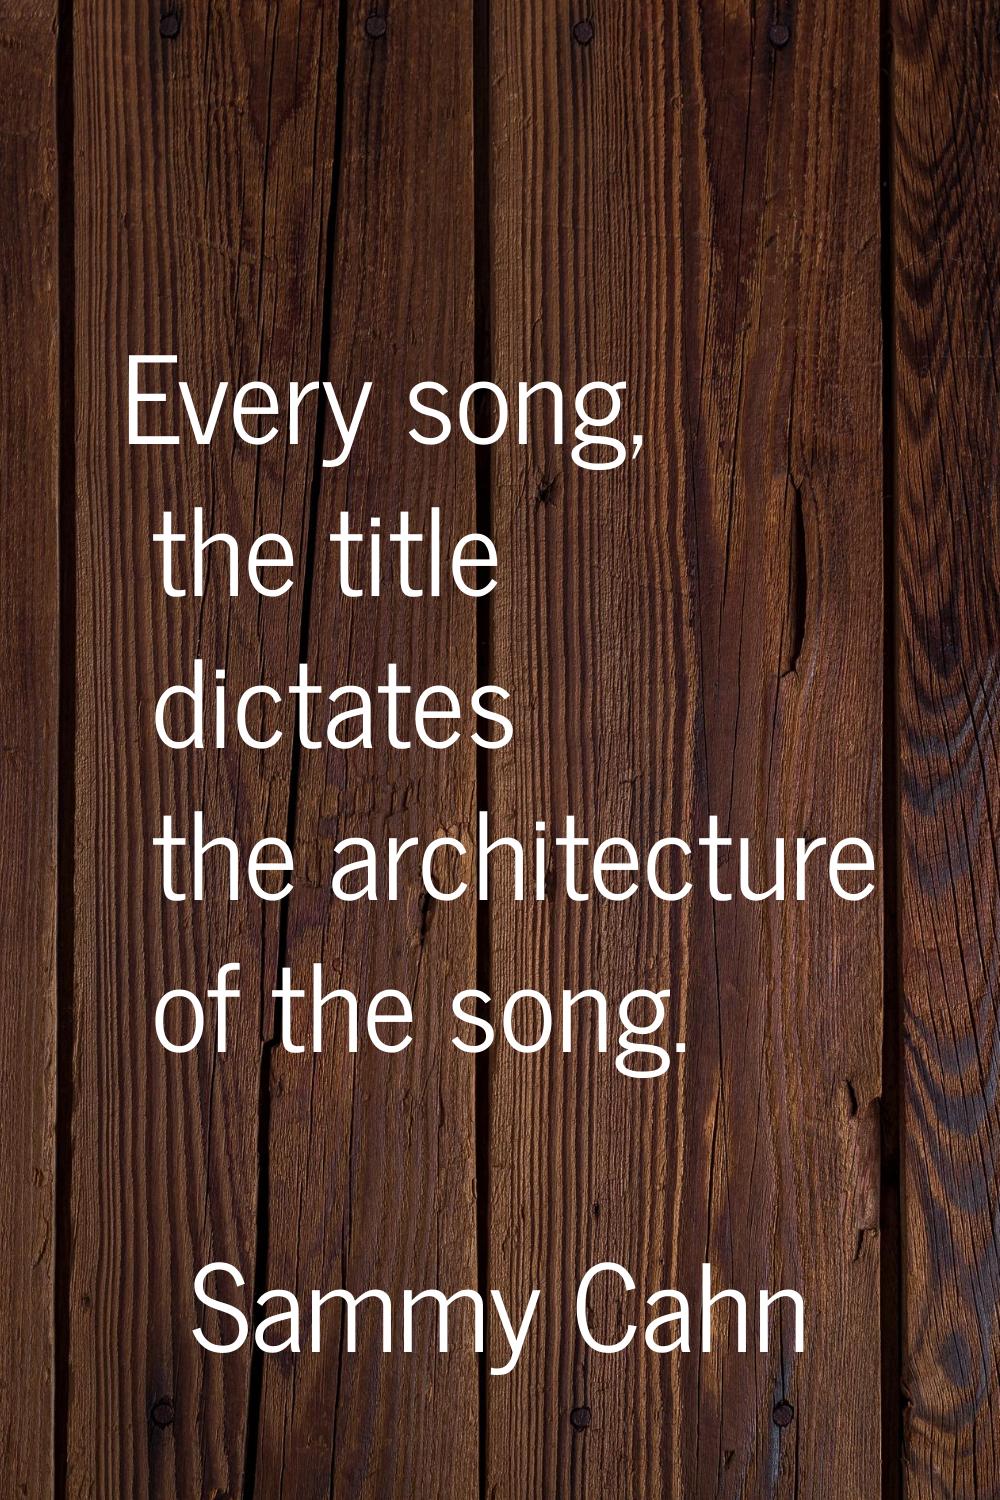 Every song, the title dictates the architecture of the song.